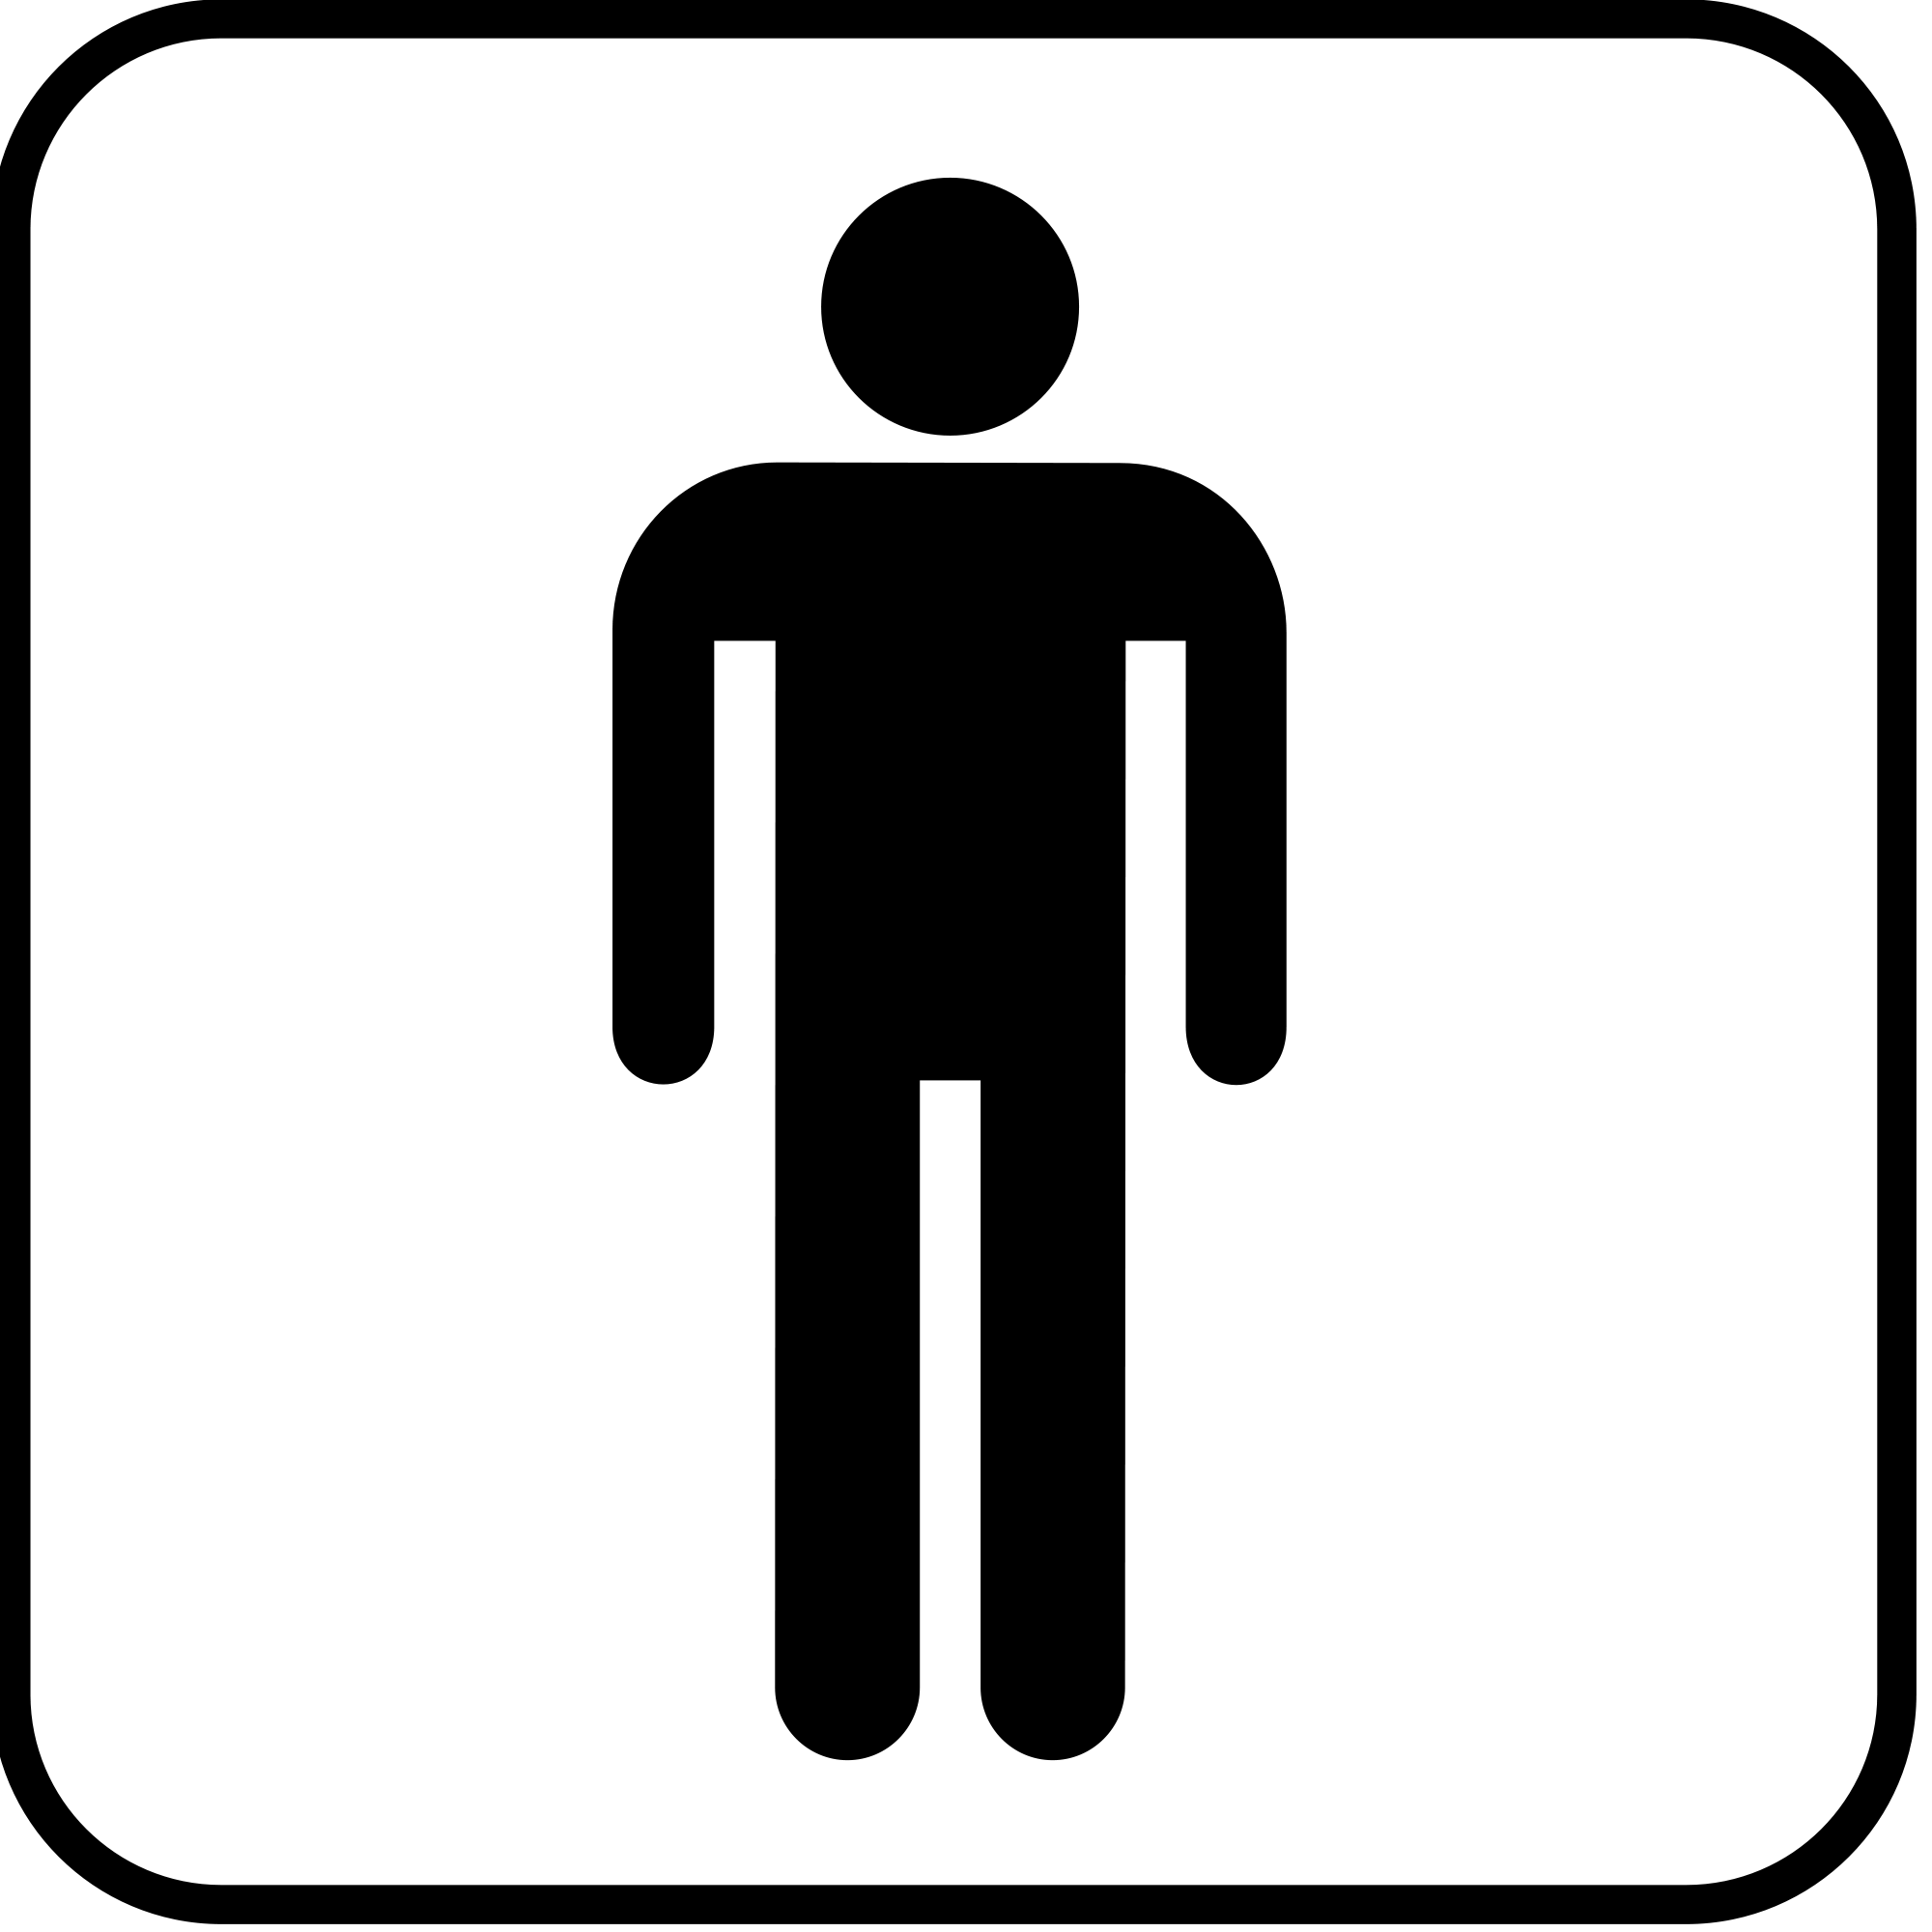 File:Pictograms-nps-accommodations-mens-restroom.svg - Wikimedia ...